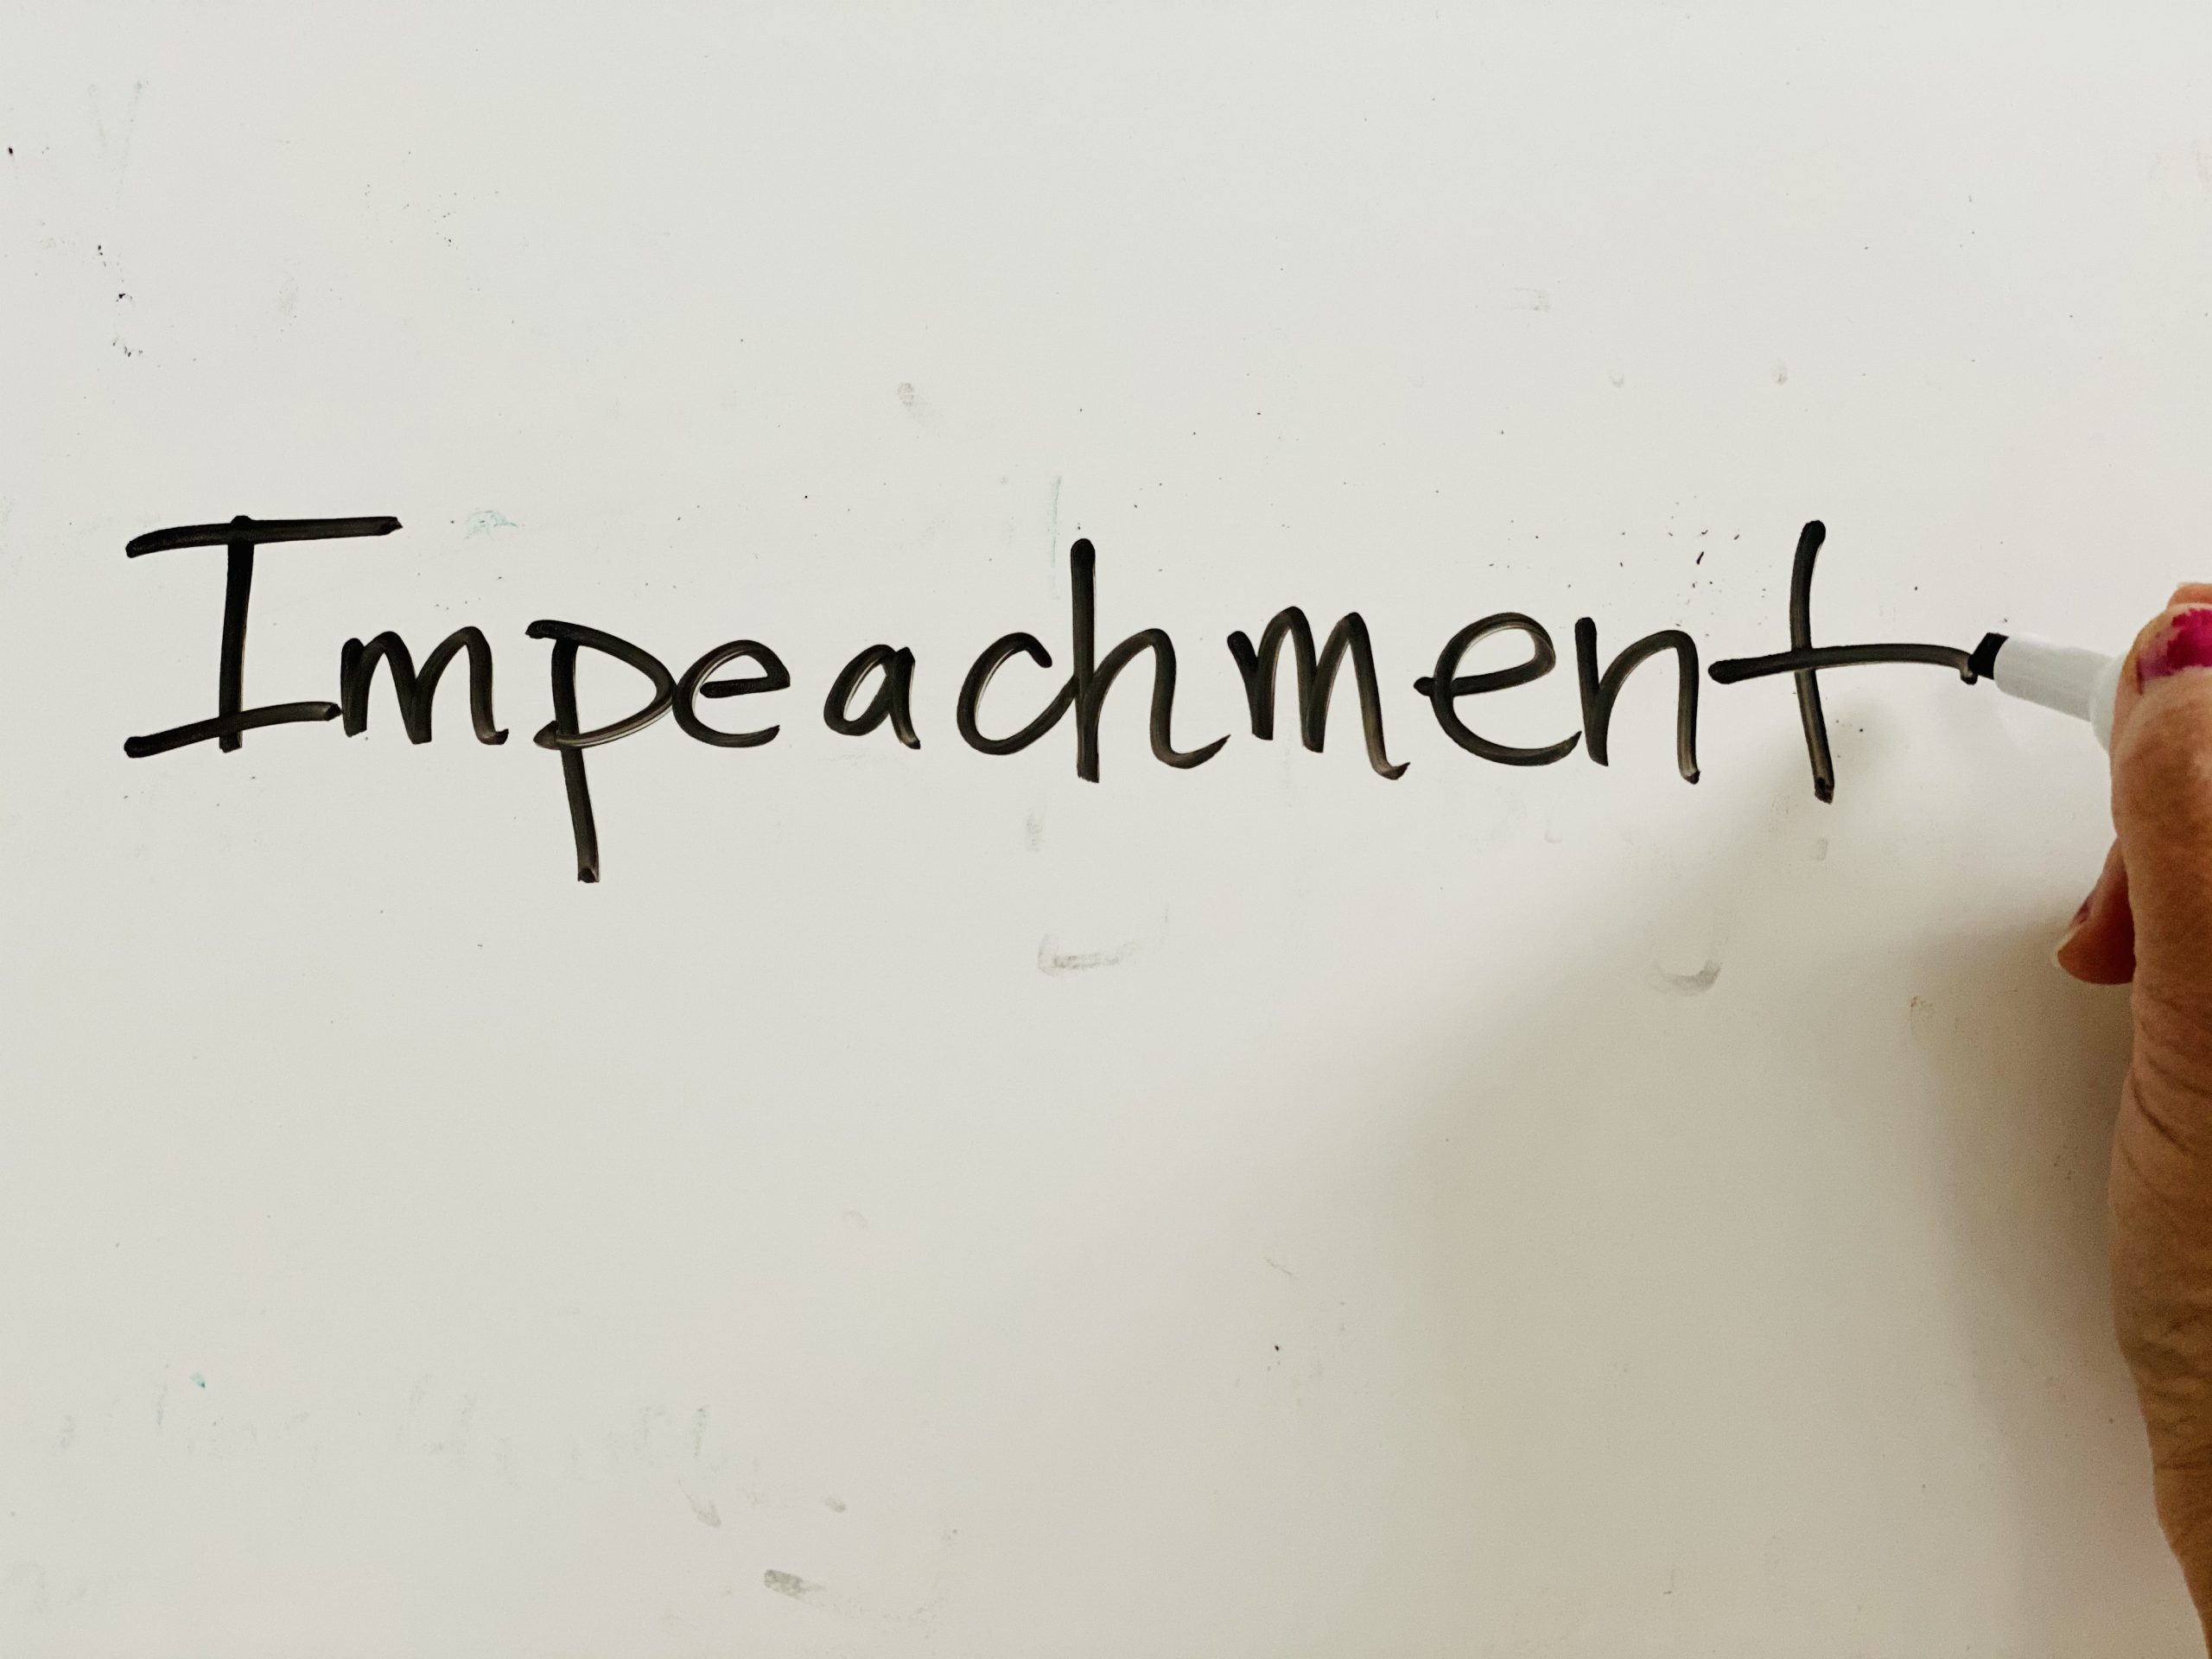 the word "impeachment" written on a white board